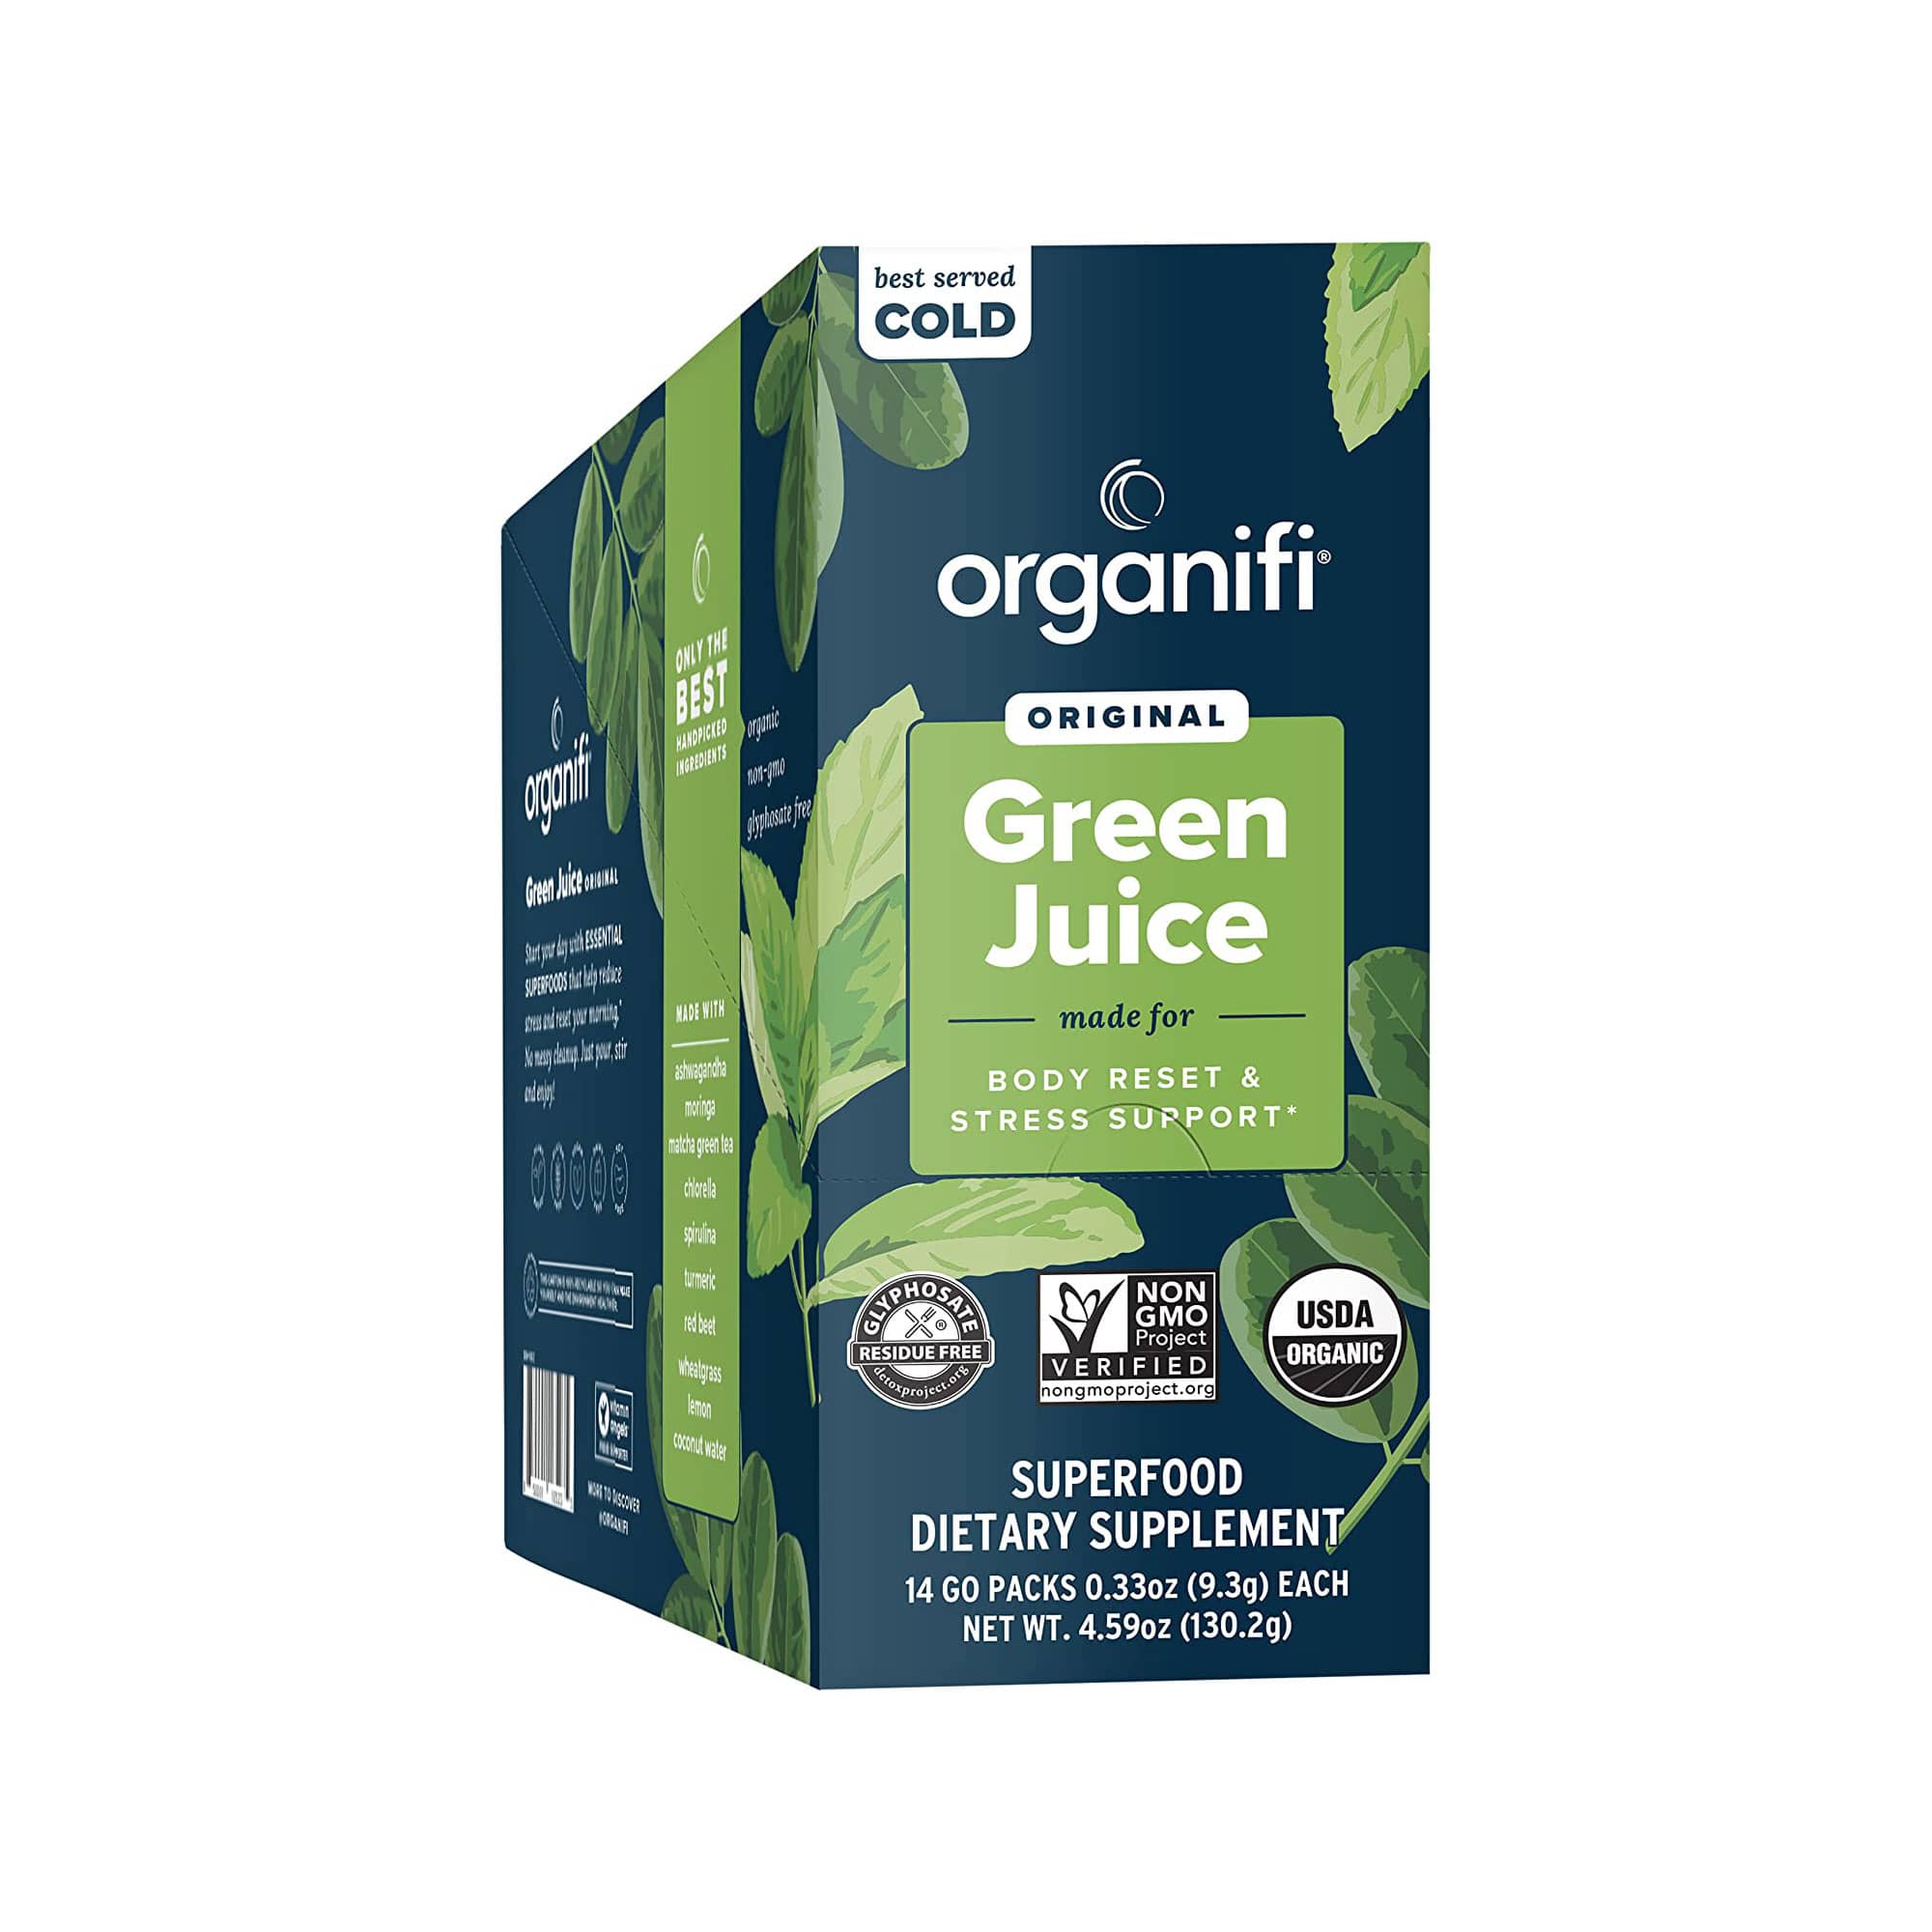 Fascination About Athletic Greens Vs Organifi Green Juice - Which One Is Best?